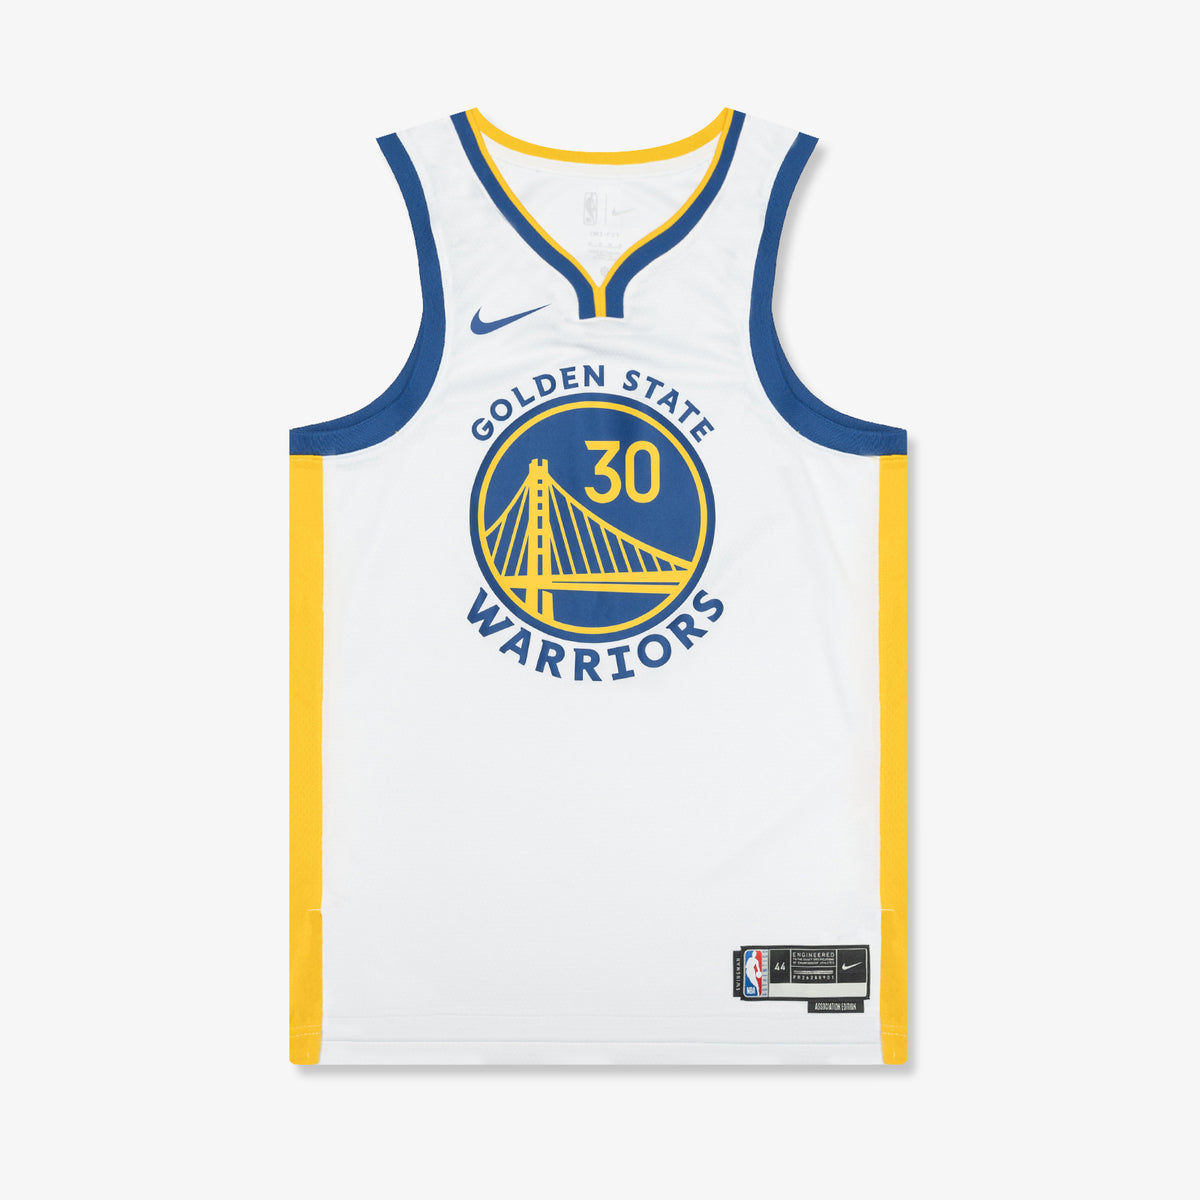  adidas Stephen Curry Golden State Warriors Black Jersey Name  and Number T-Shirt Medium : Sports & Outdoors